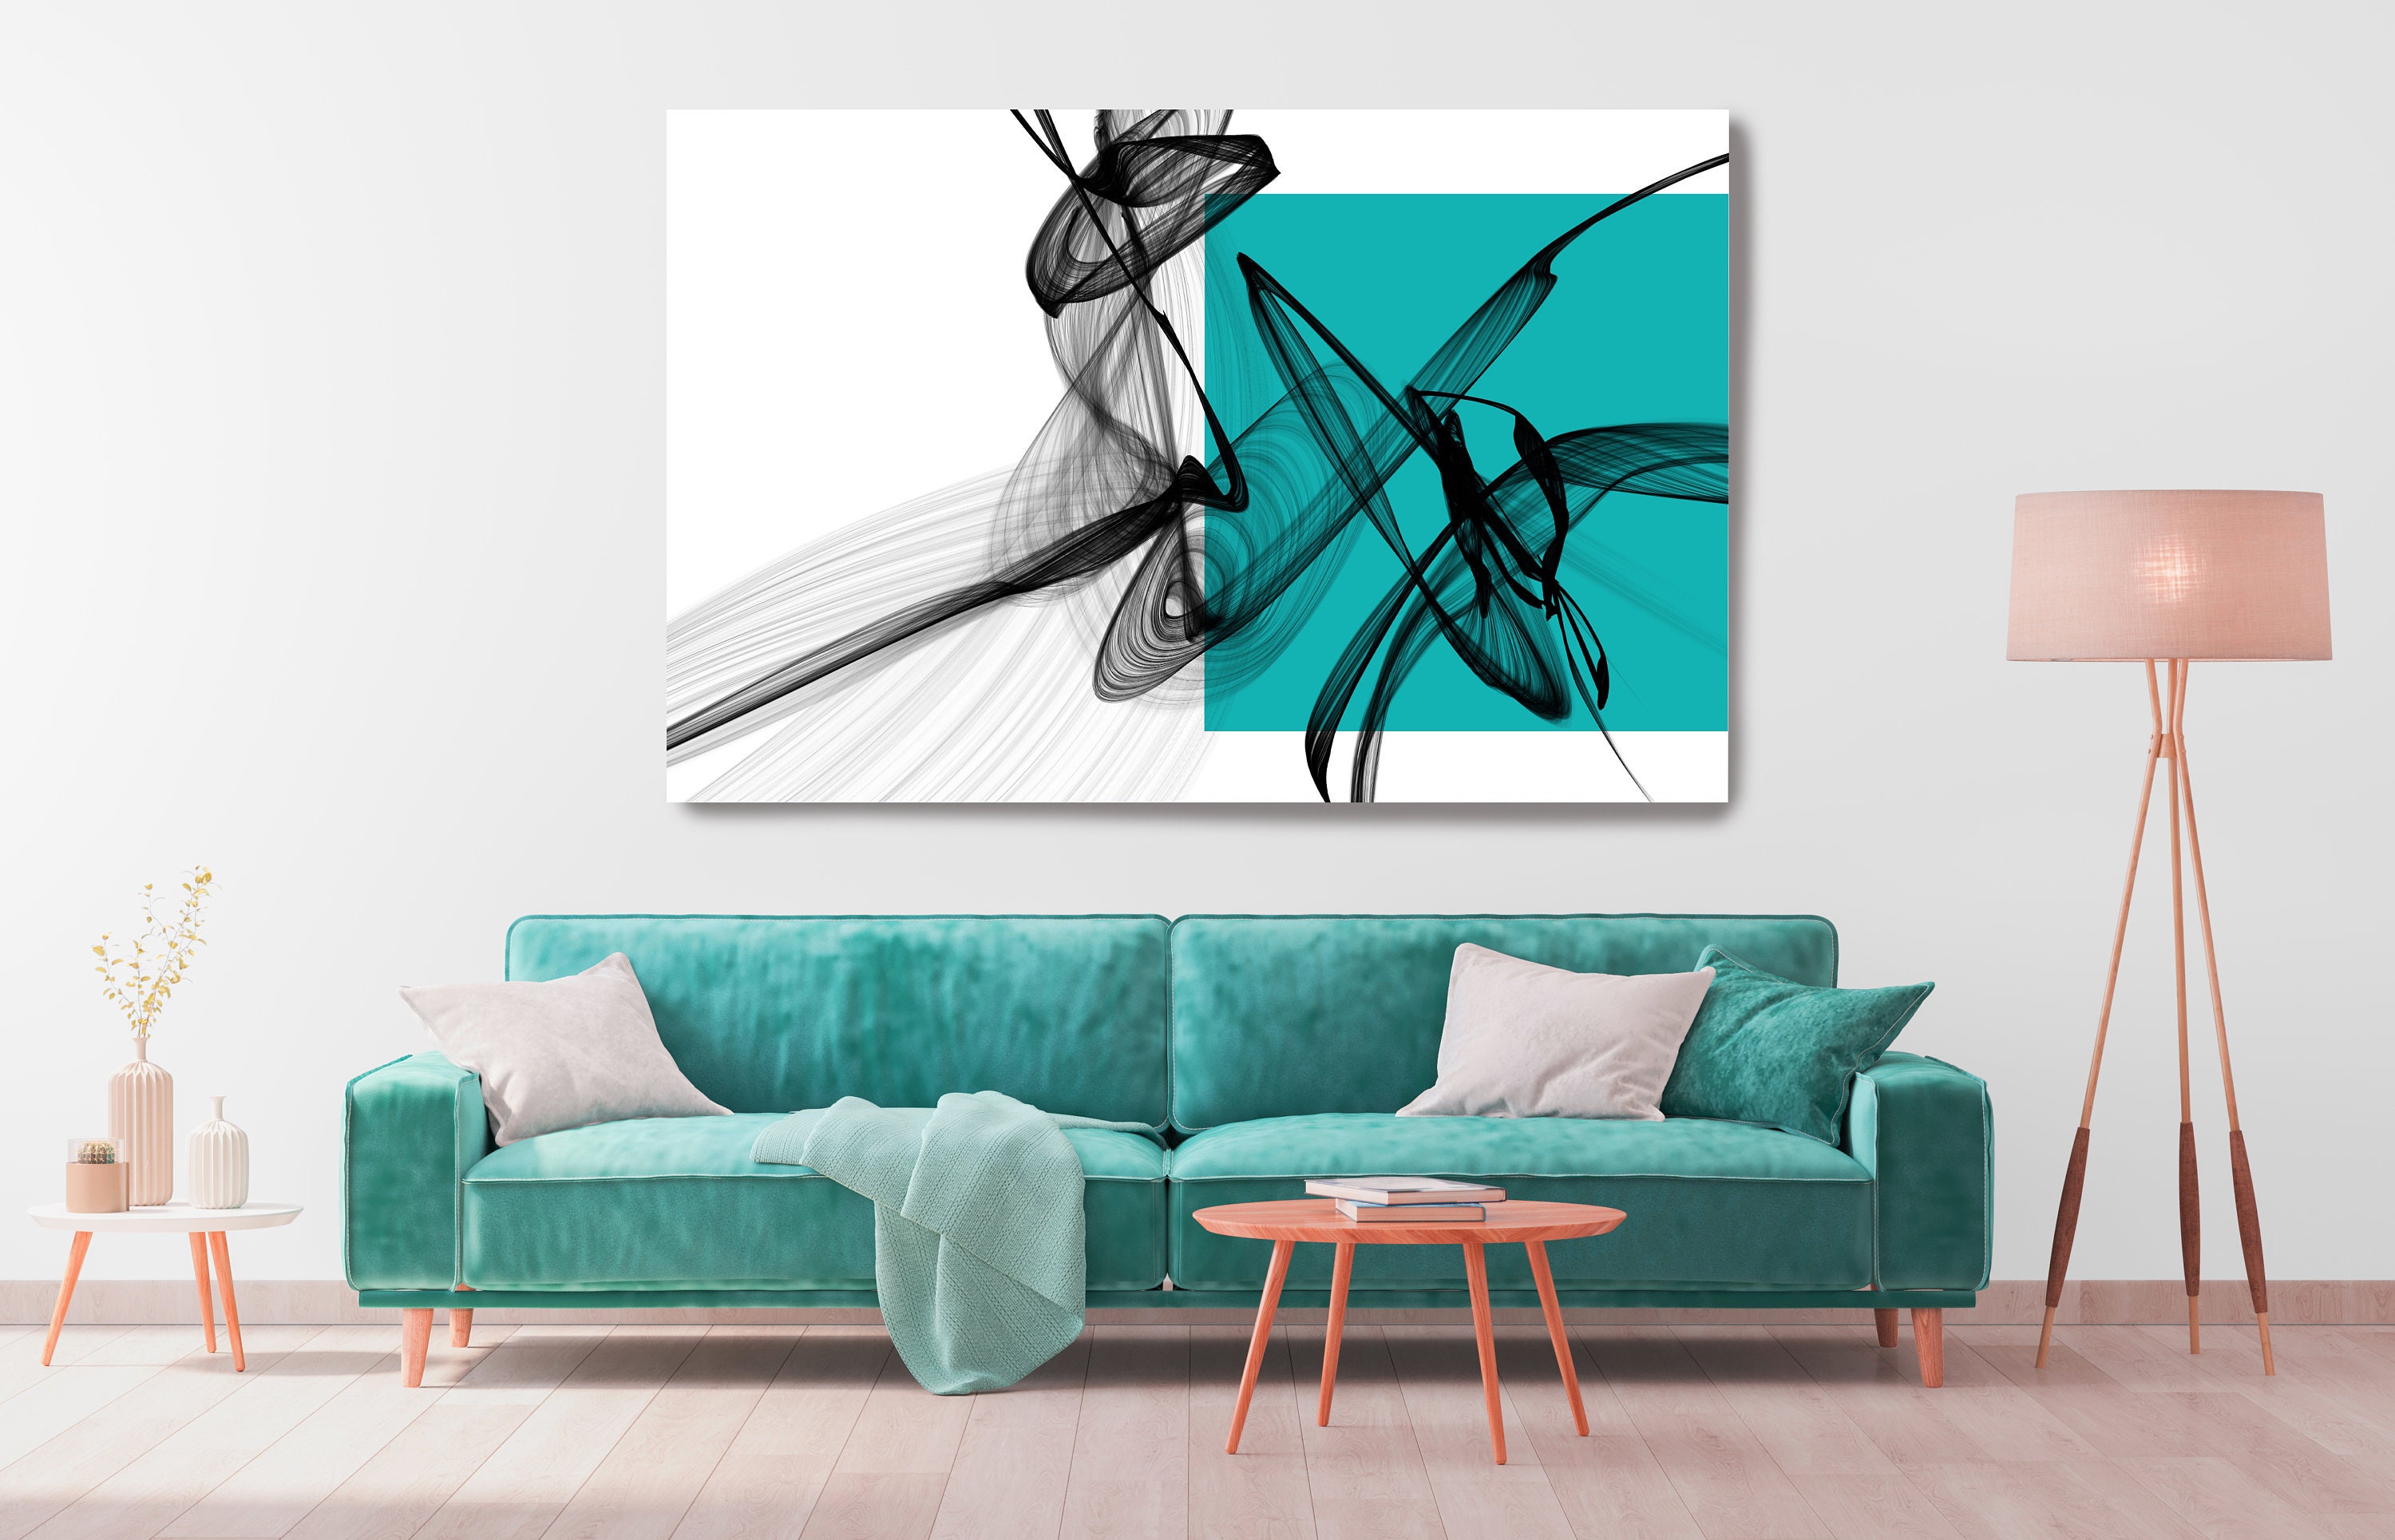 Square Oversized Abstract Canvas Artliving Room Wall 